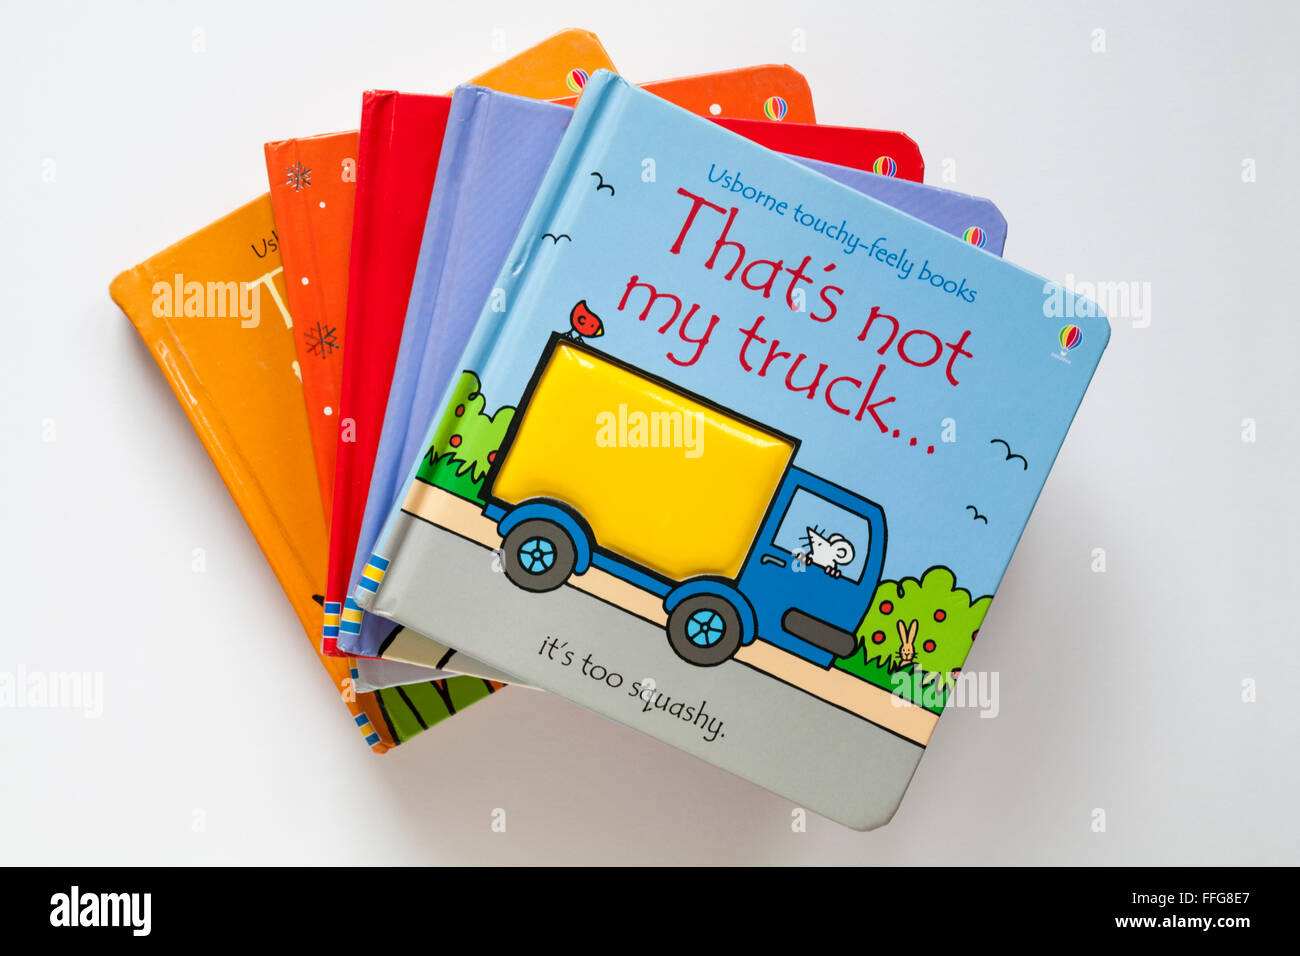 Pile of children's books in That's not my series Usborne touchy-feely books isolated on white background with That's not my truck on top Stock Photo